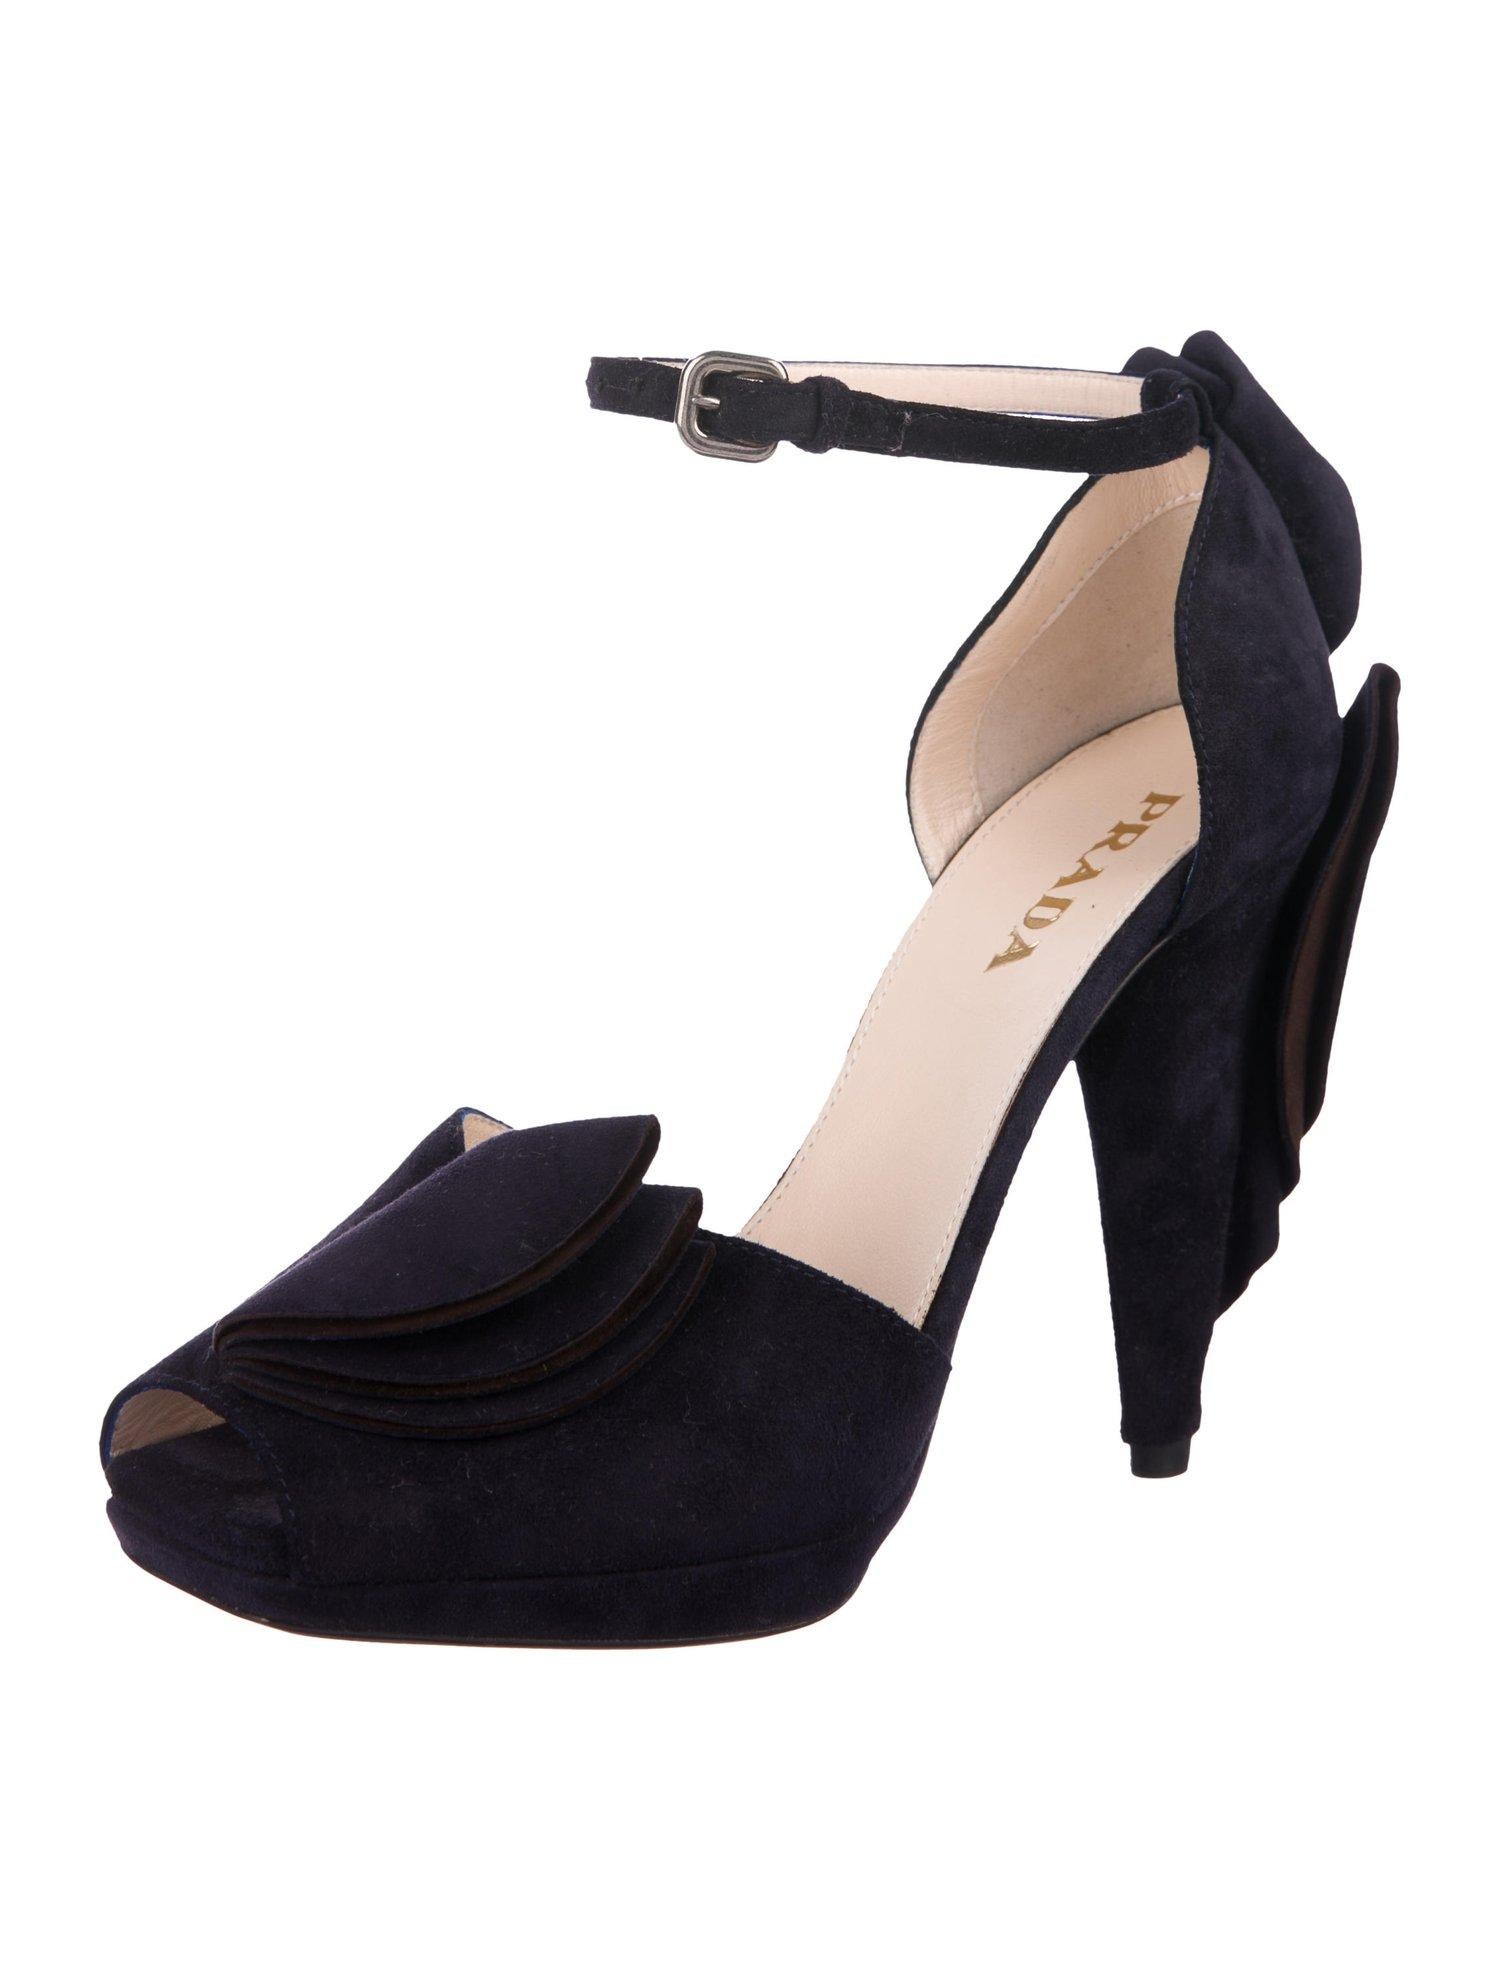 Prada NEW Midnight Blue Suede Ruffle Platform Evening Sandals Heels in Box

Size IT 36.5
Suede
Ankle buckle closure
Made in Italy
Heel height 4.5